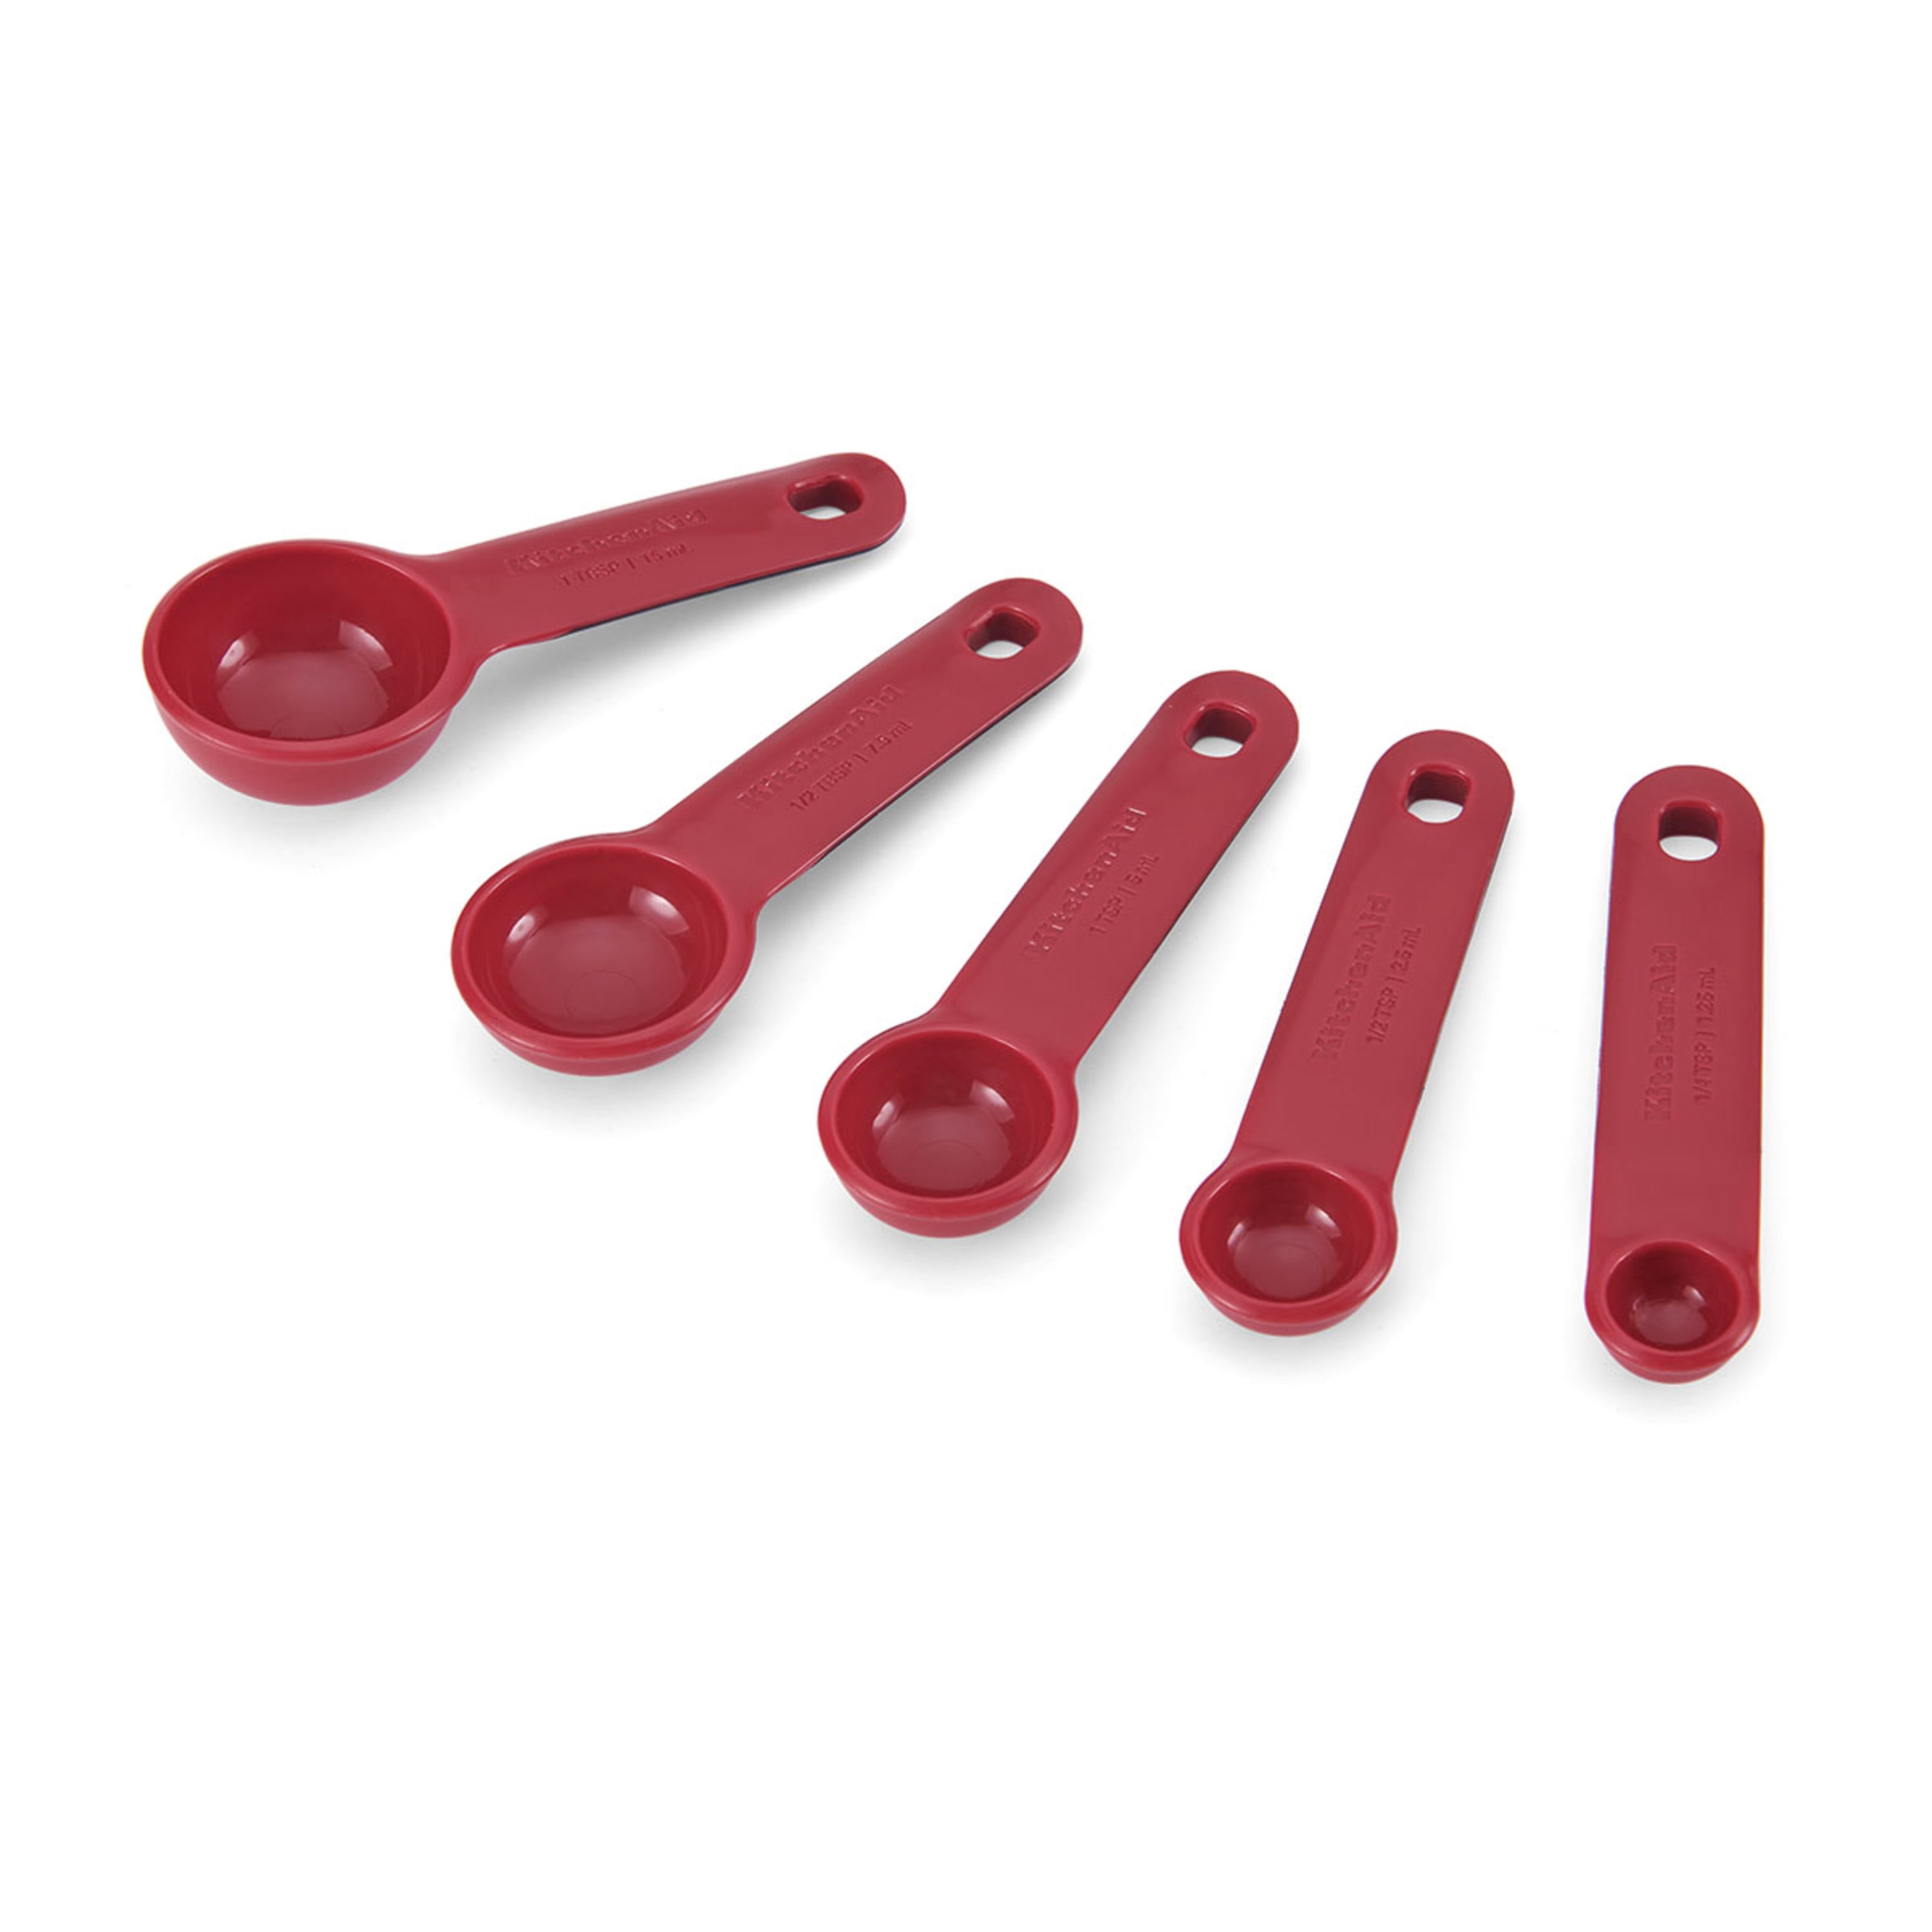 Kitchen Aid Universal Measure Cups and Spoons, Red, 9 pc Set